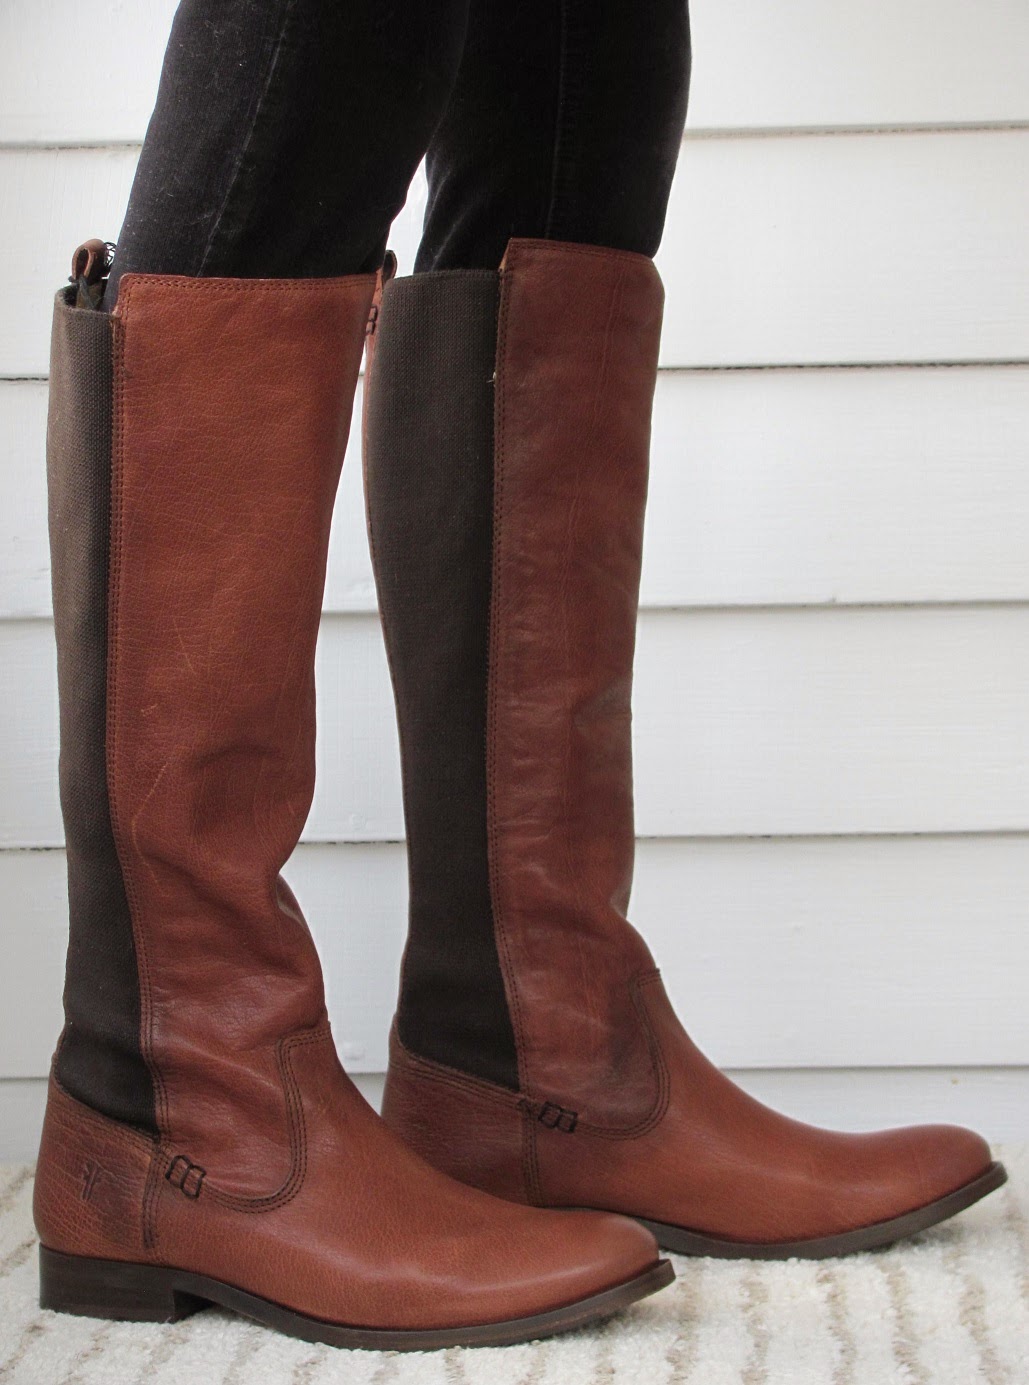 Howdy Slim! Riding Boots for Thin Calves: Frye Riding Chelsea